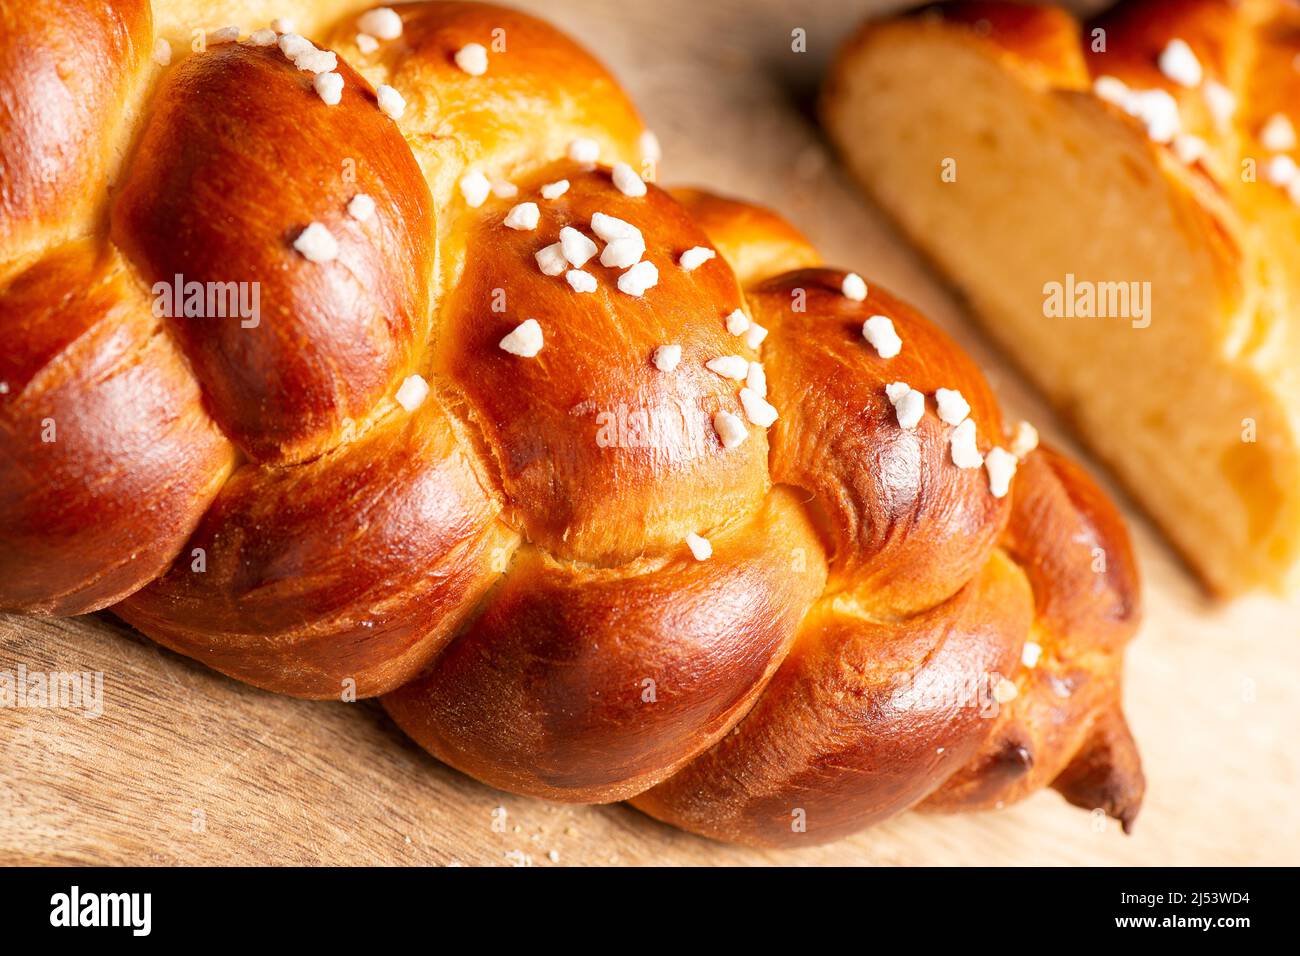 https://c8.alamy.com/comp/2J53WD4/beautiful-three-braid-golden-baked-bread-with-egg-wash-and-hail-sugar-challah-is-a-special-bread-of-ashkenazi-jewish-origin-usually-braided-and-typi-2J53WD4.jpg